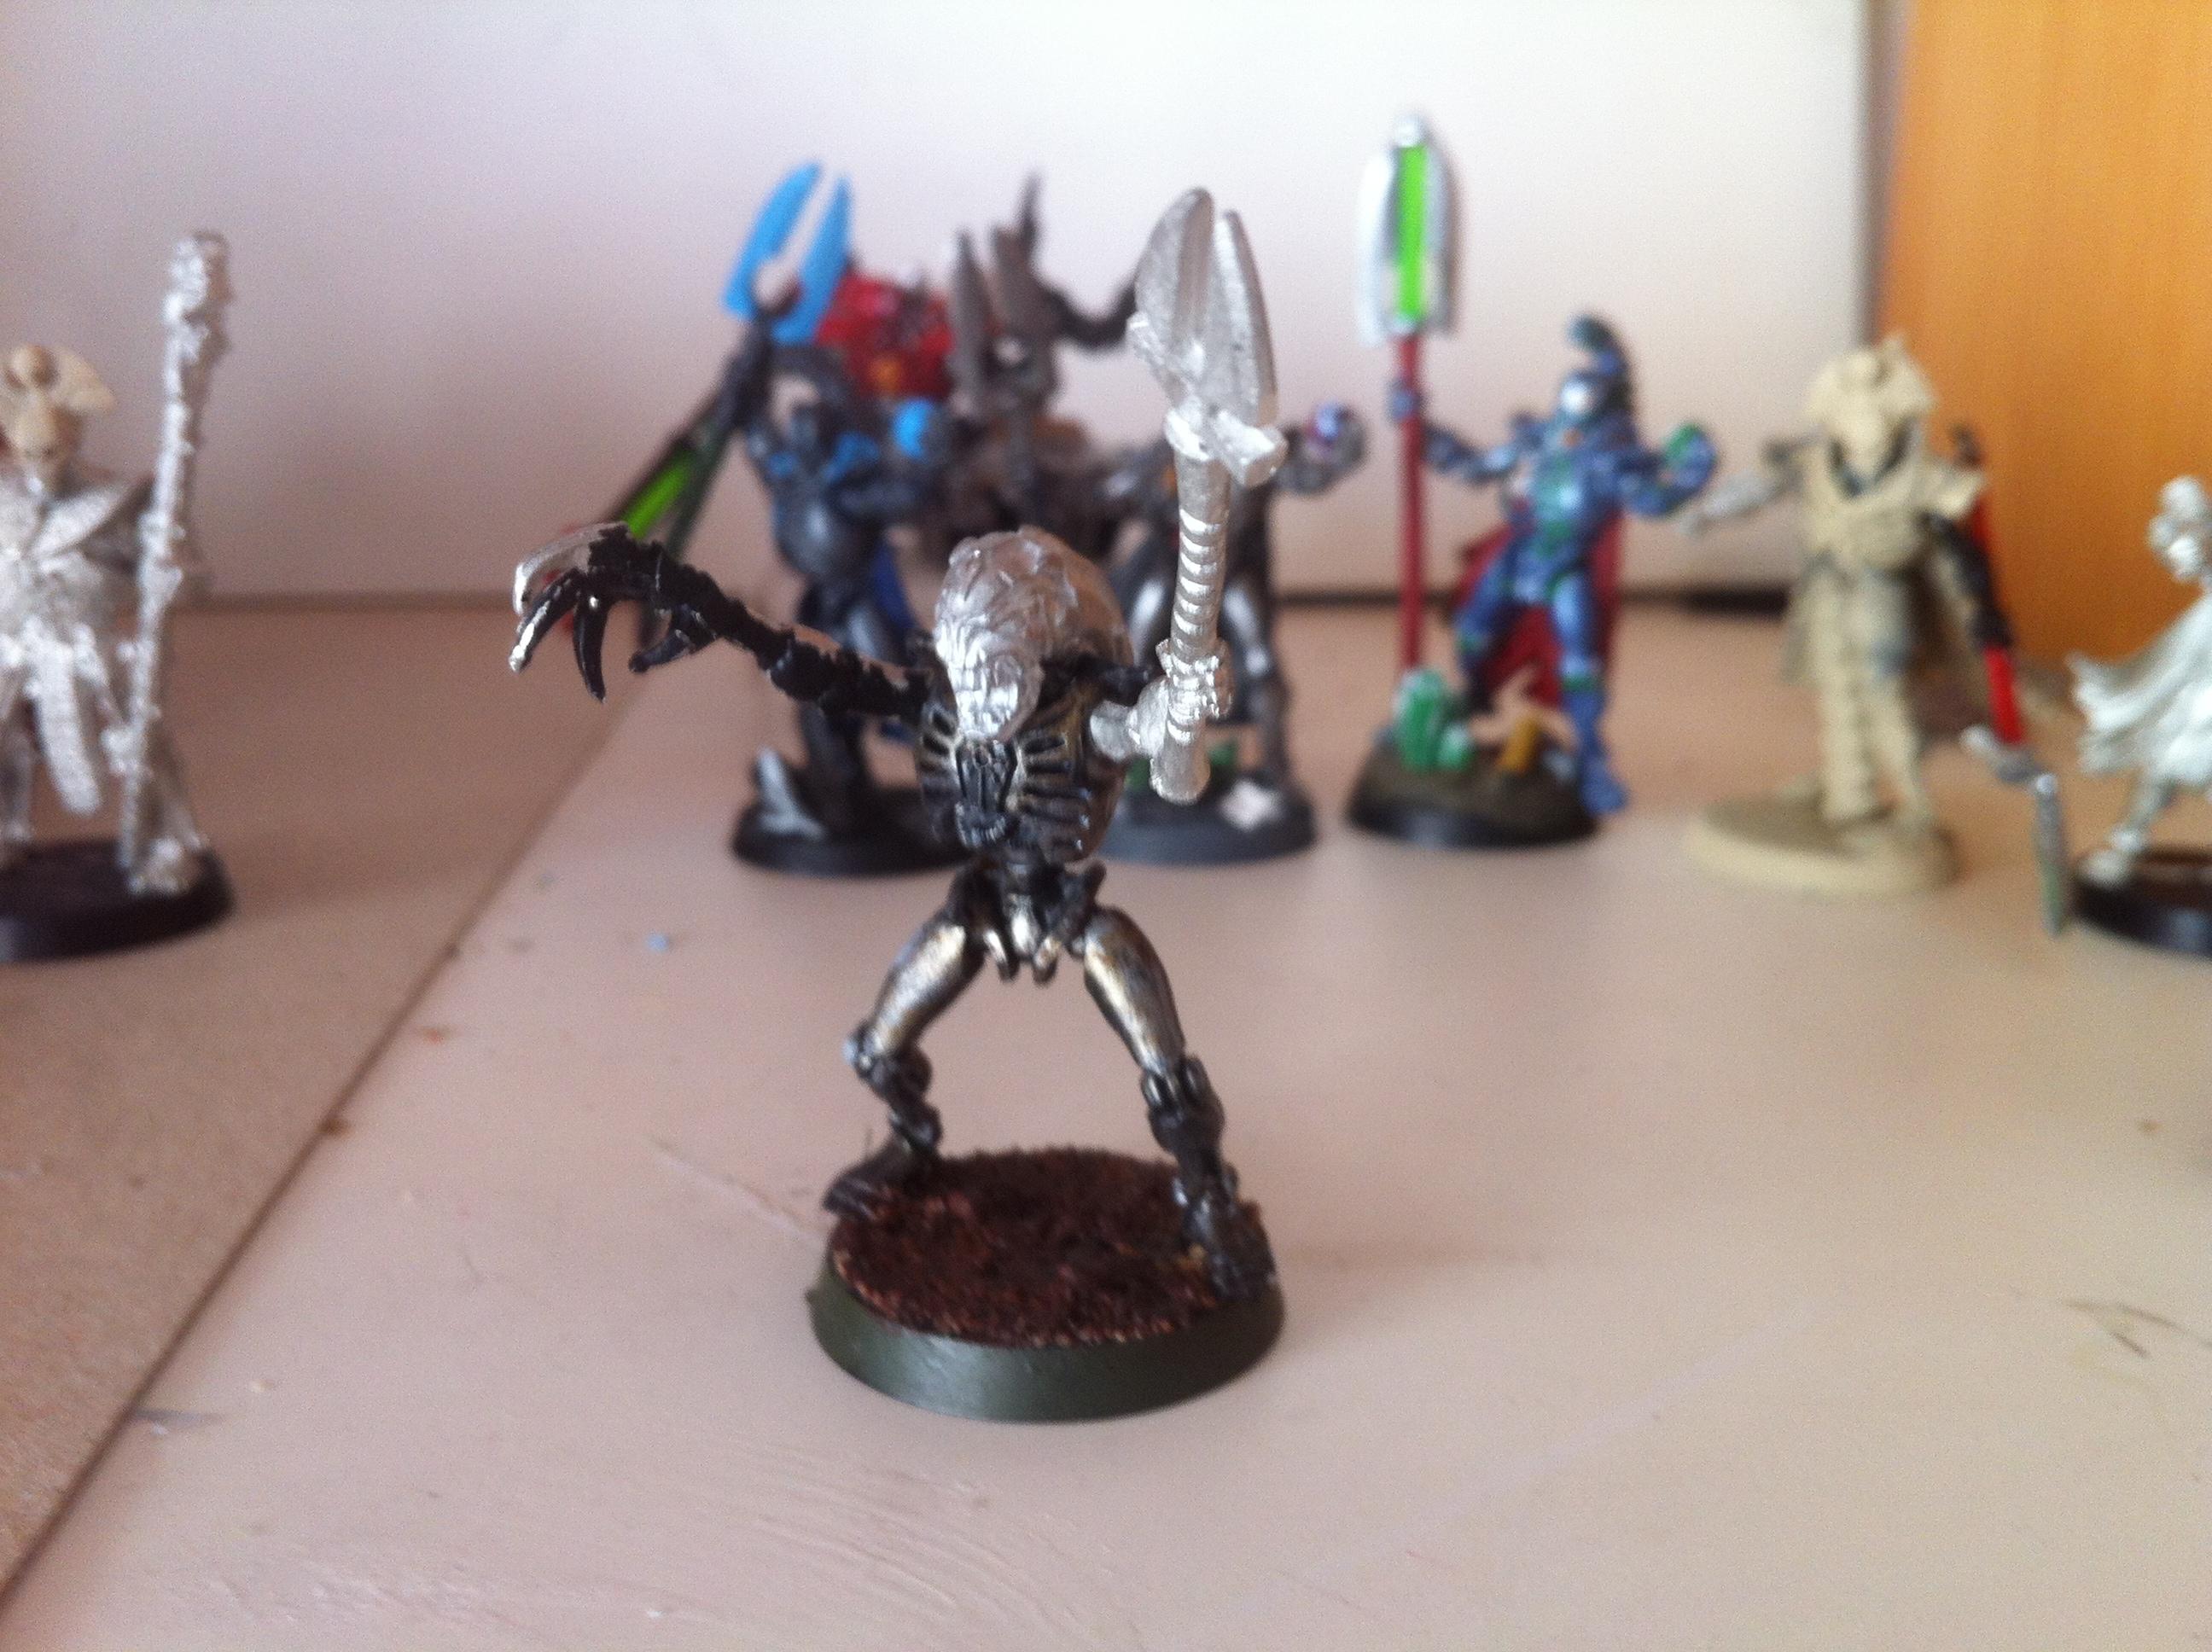 Conversion, Cool, Gaukler, Lich, Lord, Metallic, Necrons, Old, Oldhammer, Options, Quest, Rogue, Scratch Build, Skeletons, Star, Style, Trader, Undead, Variant, Warriors